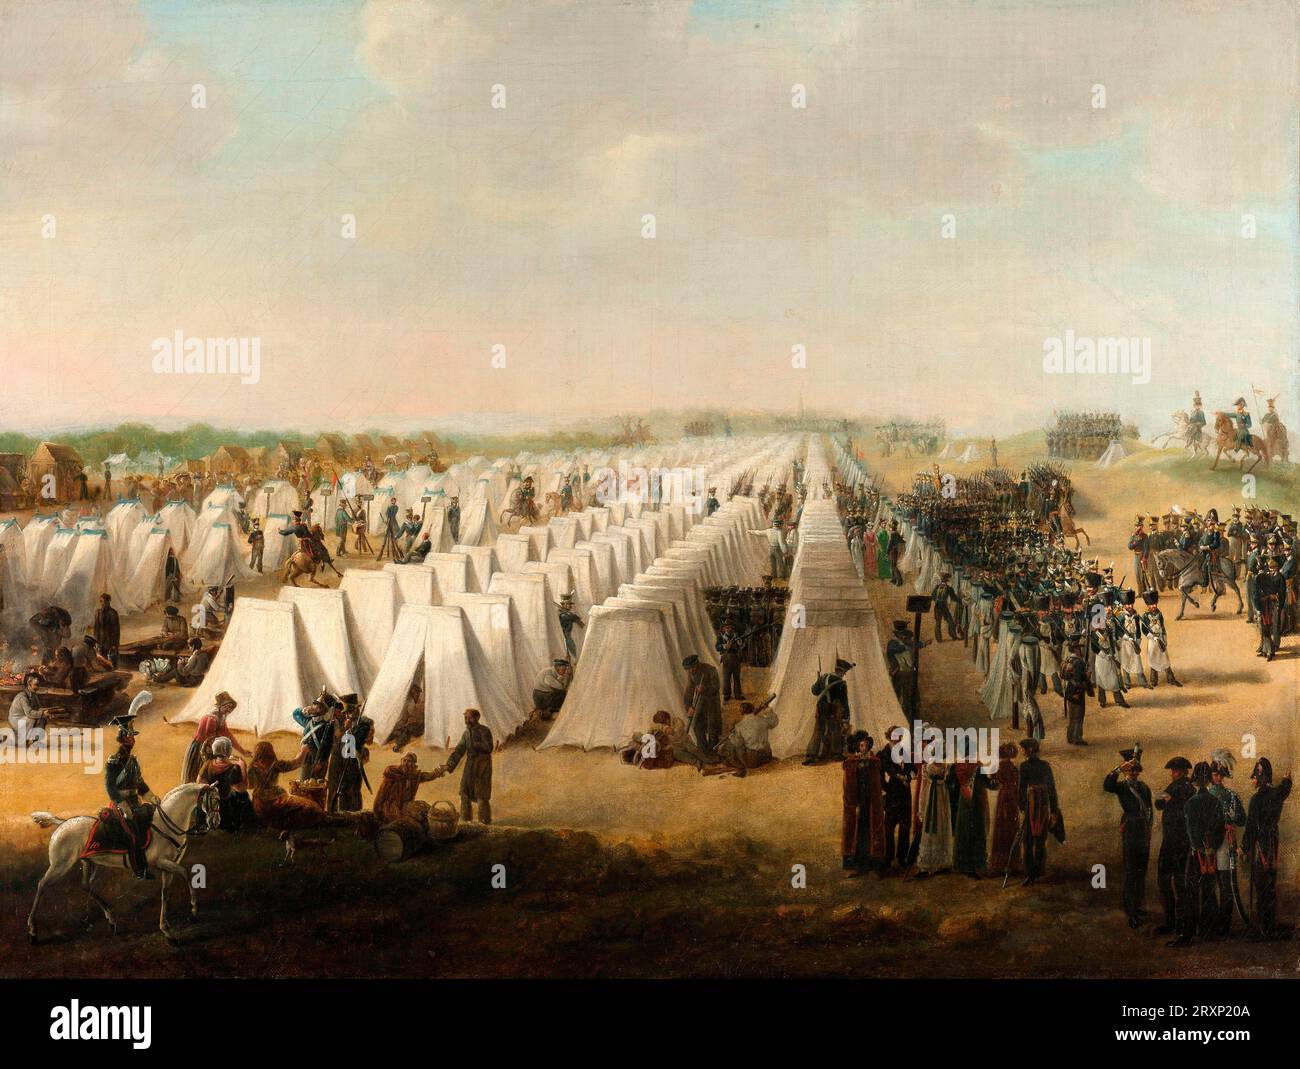 The Army Camp at Rijen, anonymous, 1831 - 1835 Established in 1815, the United Kingdom of the Netherlands was destined to be short lived. In 1830 a revolt in Brussels broke out and led to the founding of the independent state of Belgium. King William I refused to accept this. In the summer of 1831, he gathered Dutch troops in this army camp at Rijen, close to the Belgian border, and prepared a campaign against the Belgians. Stock Photo